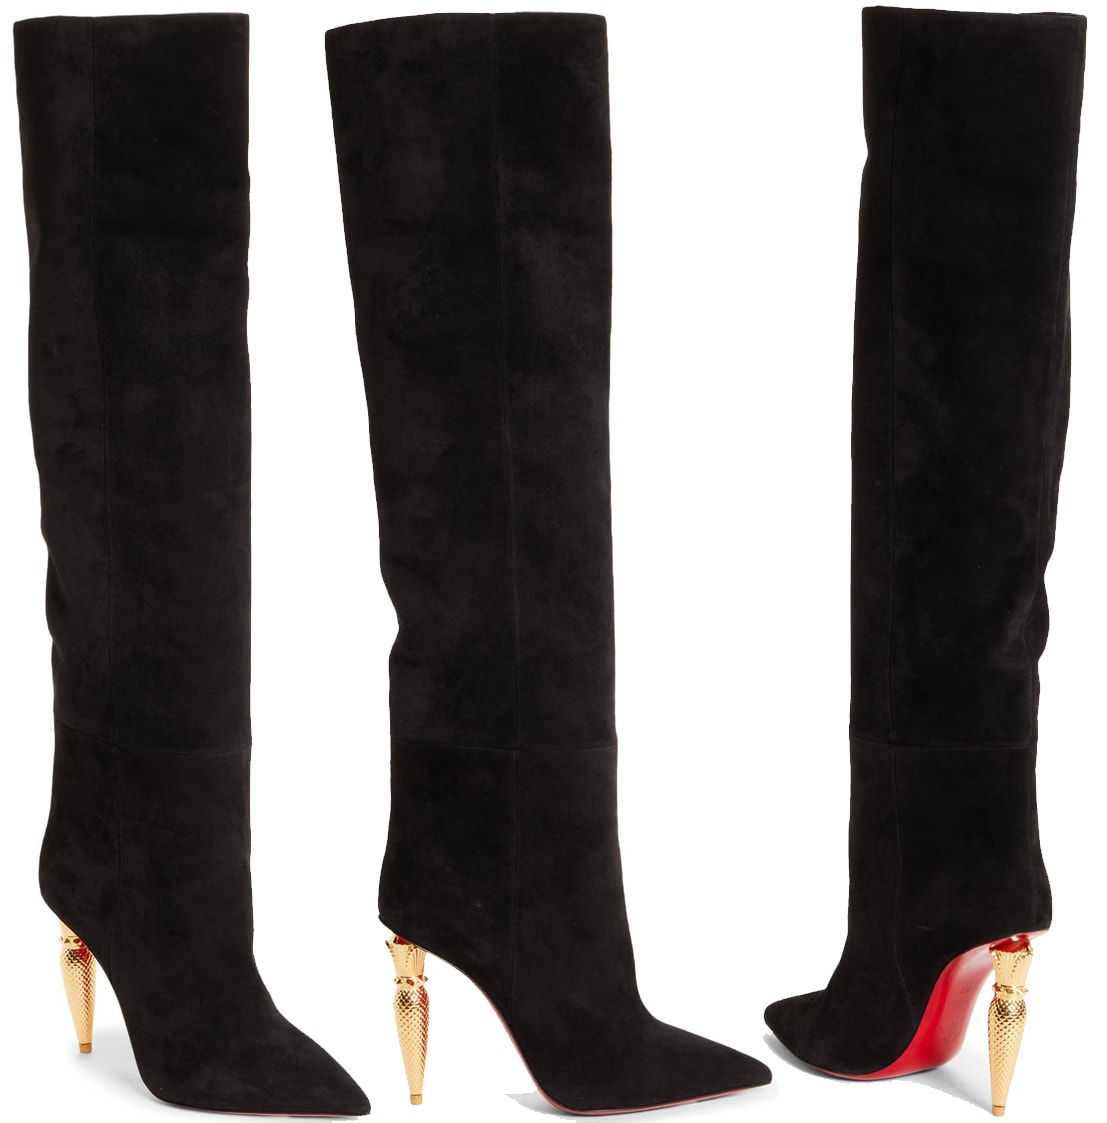 The over-the-knee version of the Lipbooty, the Lipbotta boots have a 19-inch shaft, finished with the signature lipstick heels